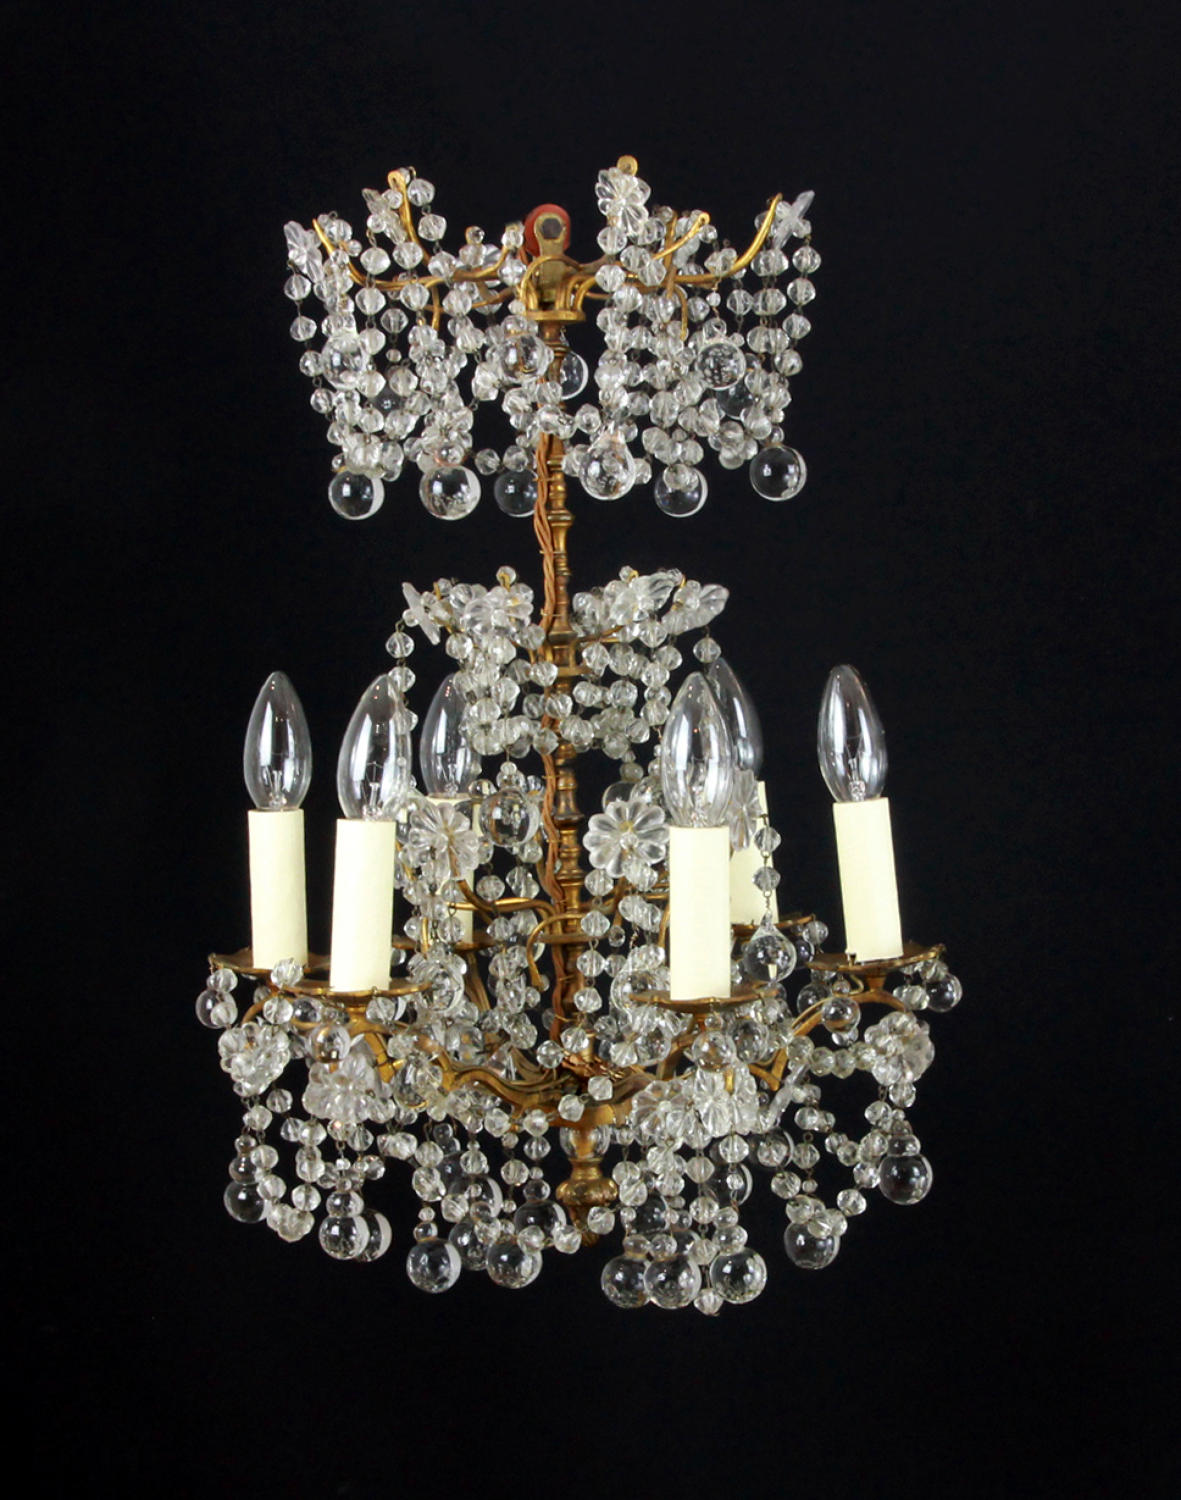 A small 17th century style chandelier